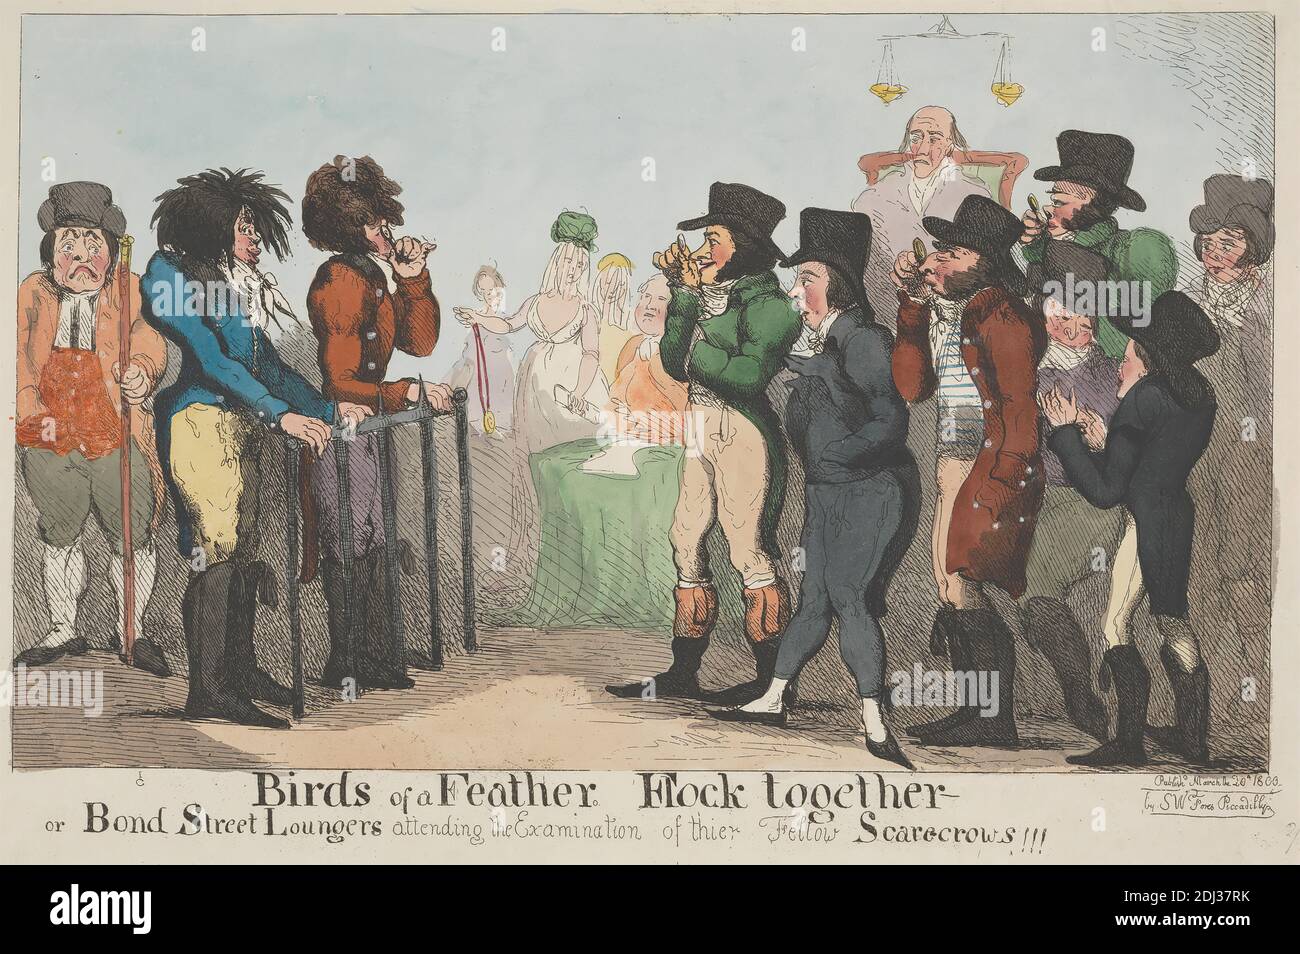 Birds of a Feather, Flock Together - or Bond Street Loungers Attending the Examination of Their Fellow Scarecrows!, Isaac Cruikshank, 1756–1810, British, 1800, Etching, hand-colored, Sheet: 8 7/8 x 14 7/8in. (22.5 x 37.8cm Stock Photo